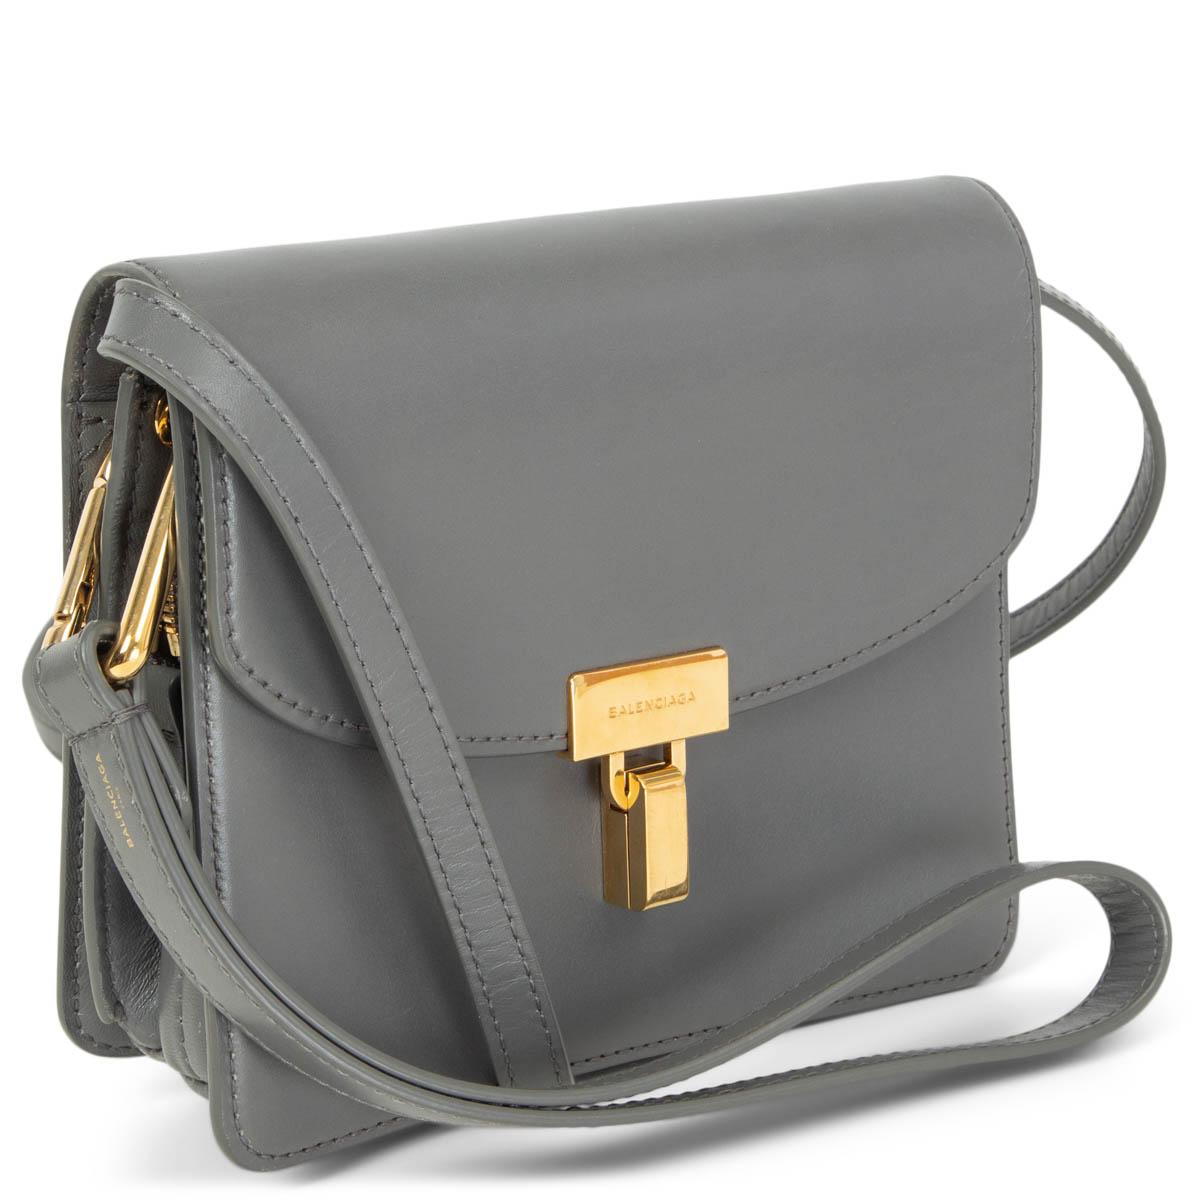 100% authentic Balenciaga Lock Shoulder Bag in grey smooth calfskin featuring gold-tone hardware. Opens with a curved front flap and turn-lock to a leather lined interior that is divided in 2 compartments one of them with a zipper closure and 2 flat